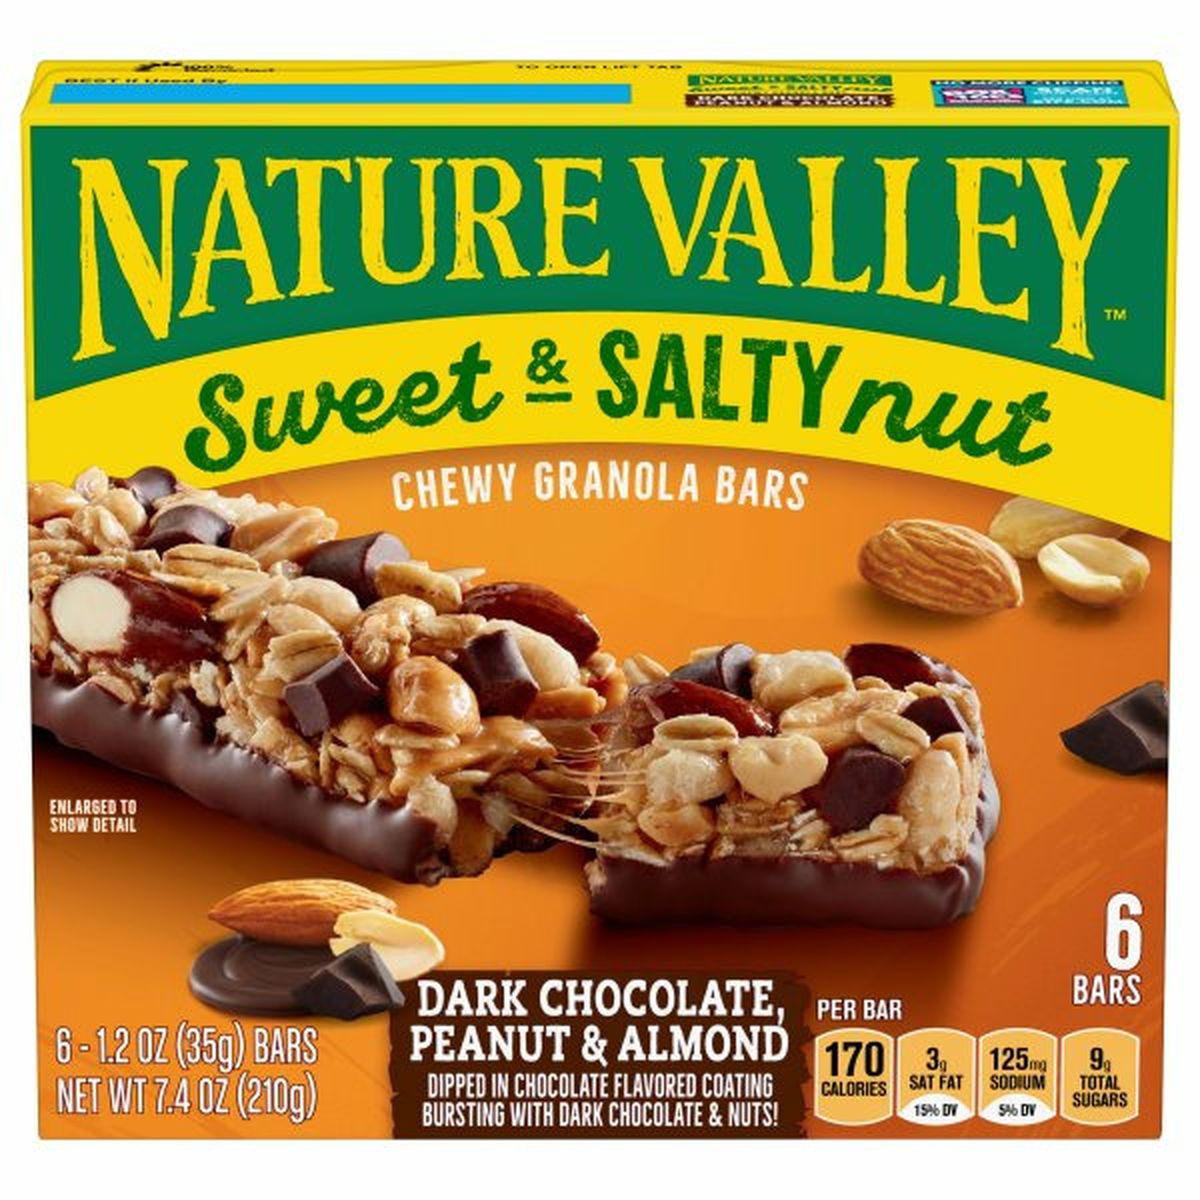 Calories in Nature Valley Granola Bars, Chewy, Dark Chocolate Peanut & Almond, Chewy, Sweet & Salty Nut